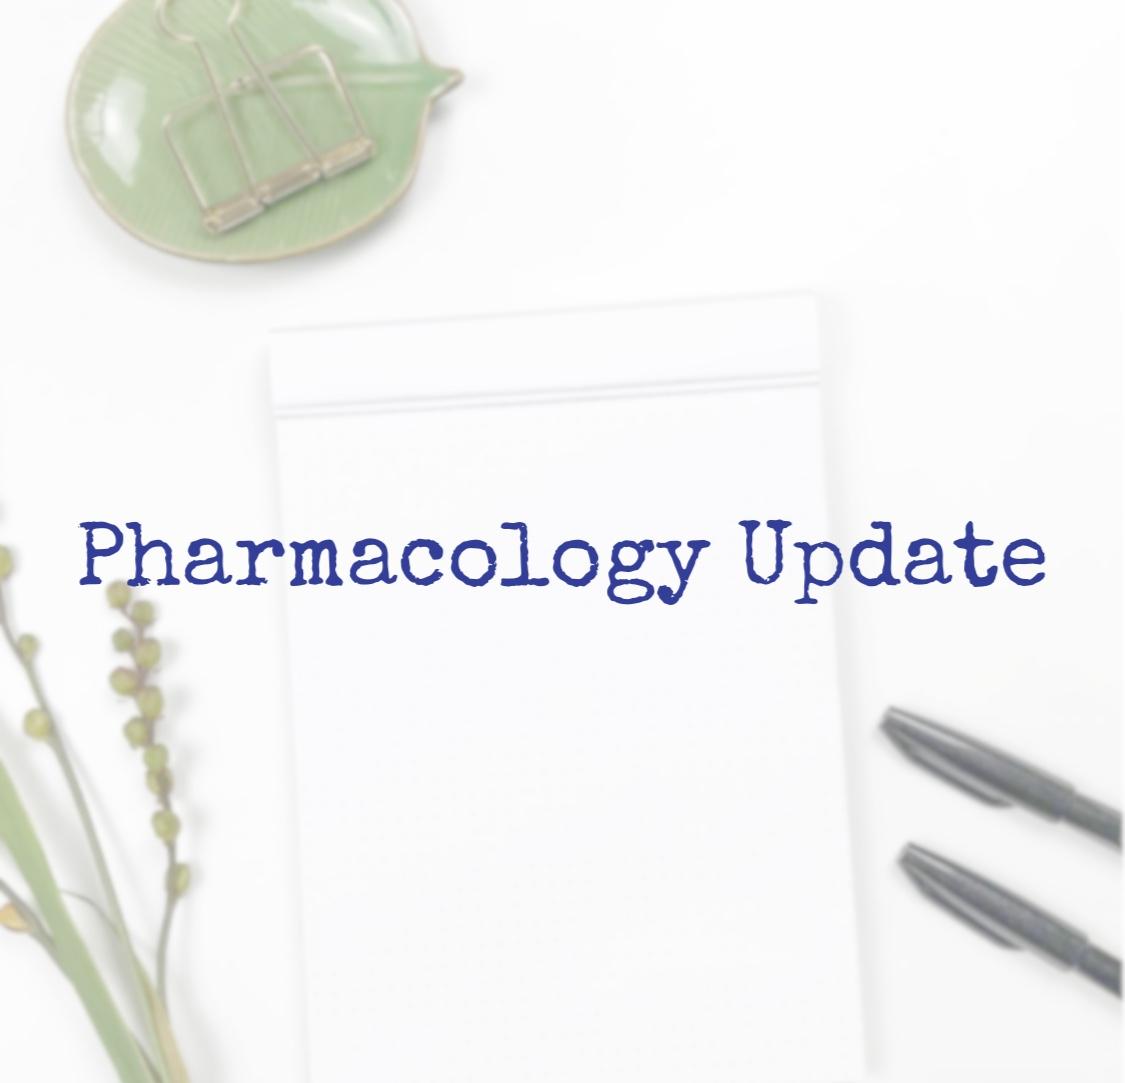 Pharmacology Update for Nurse Practitioners: May 29, 2020